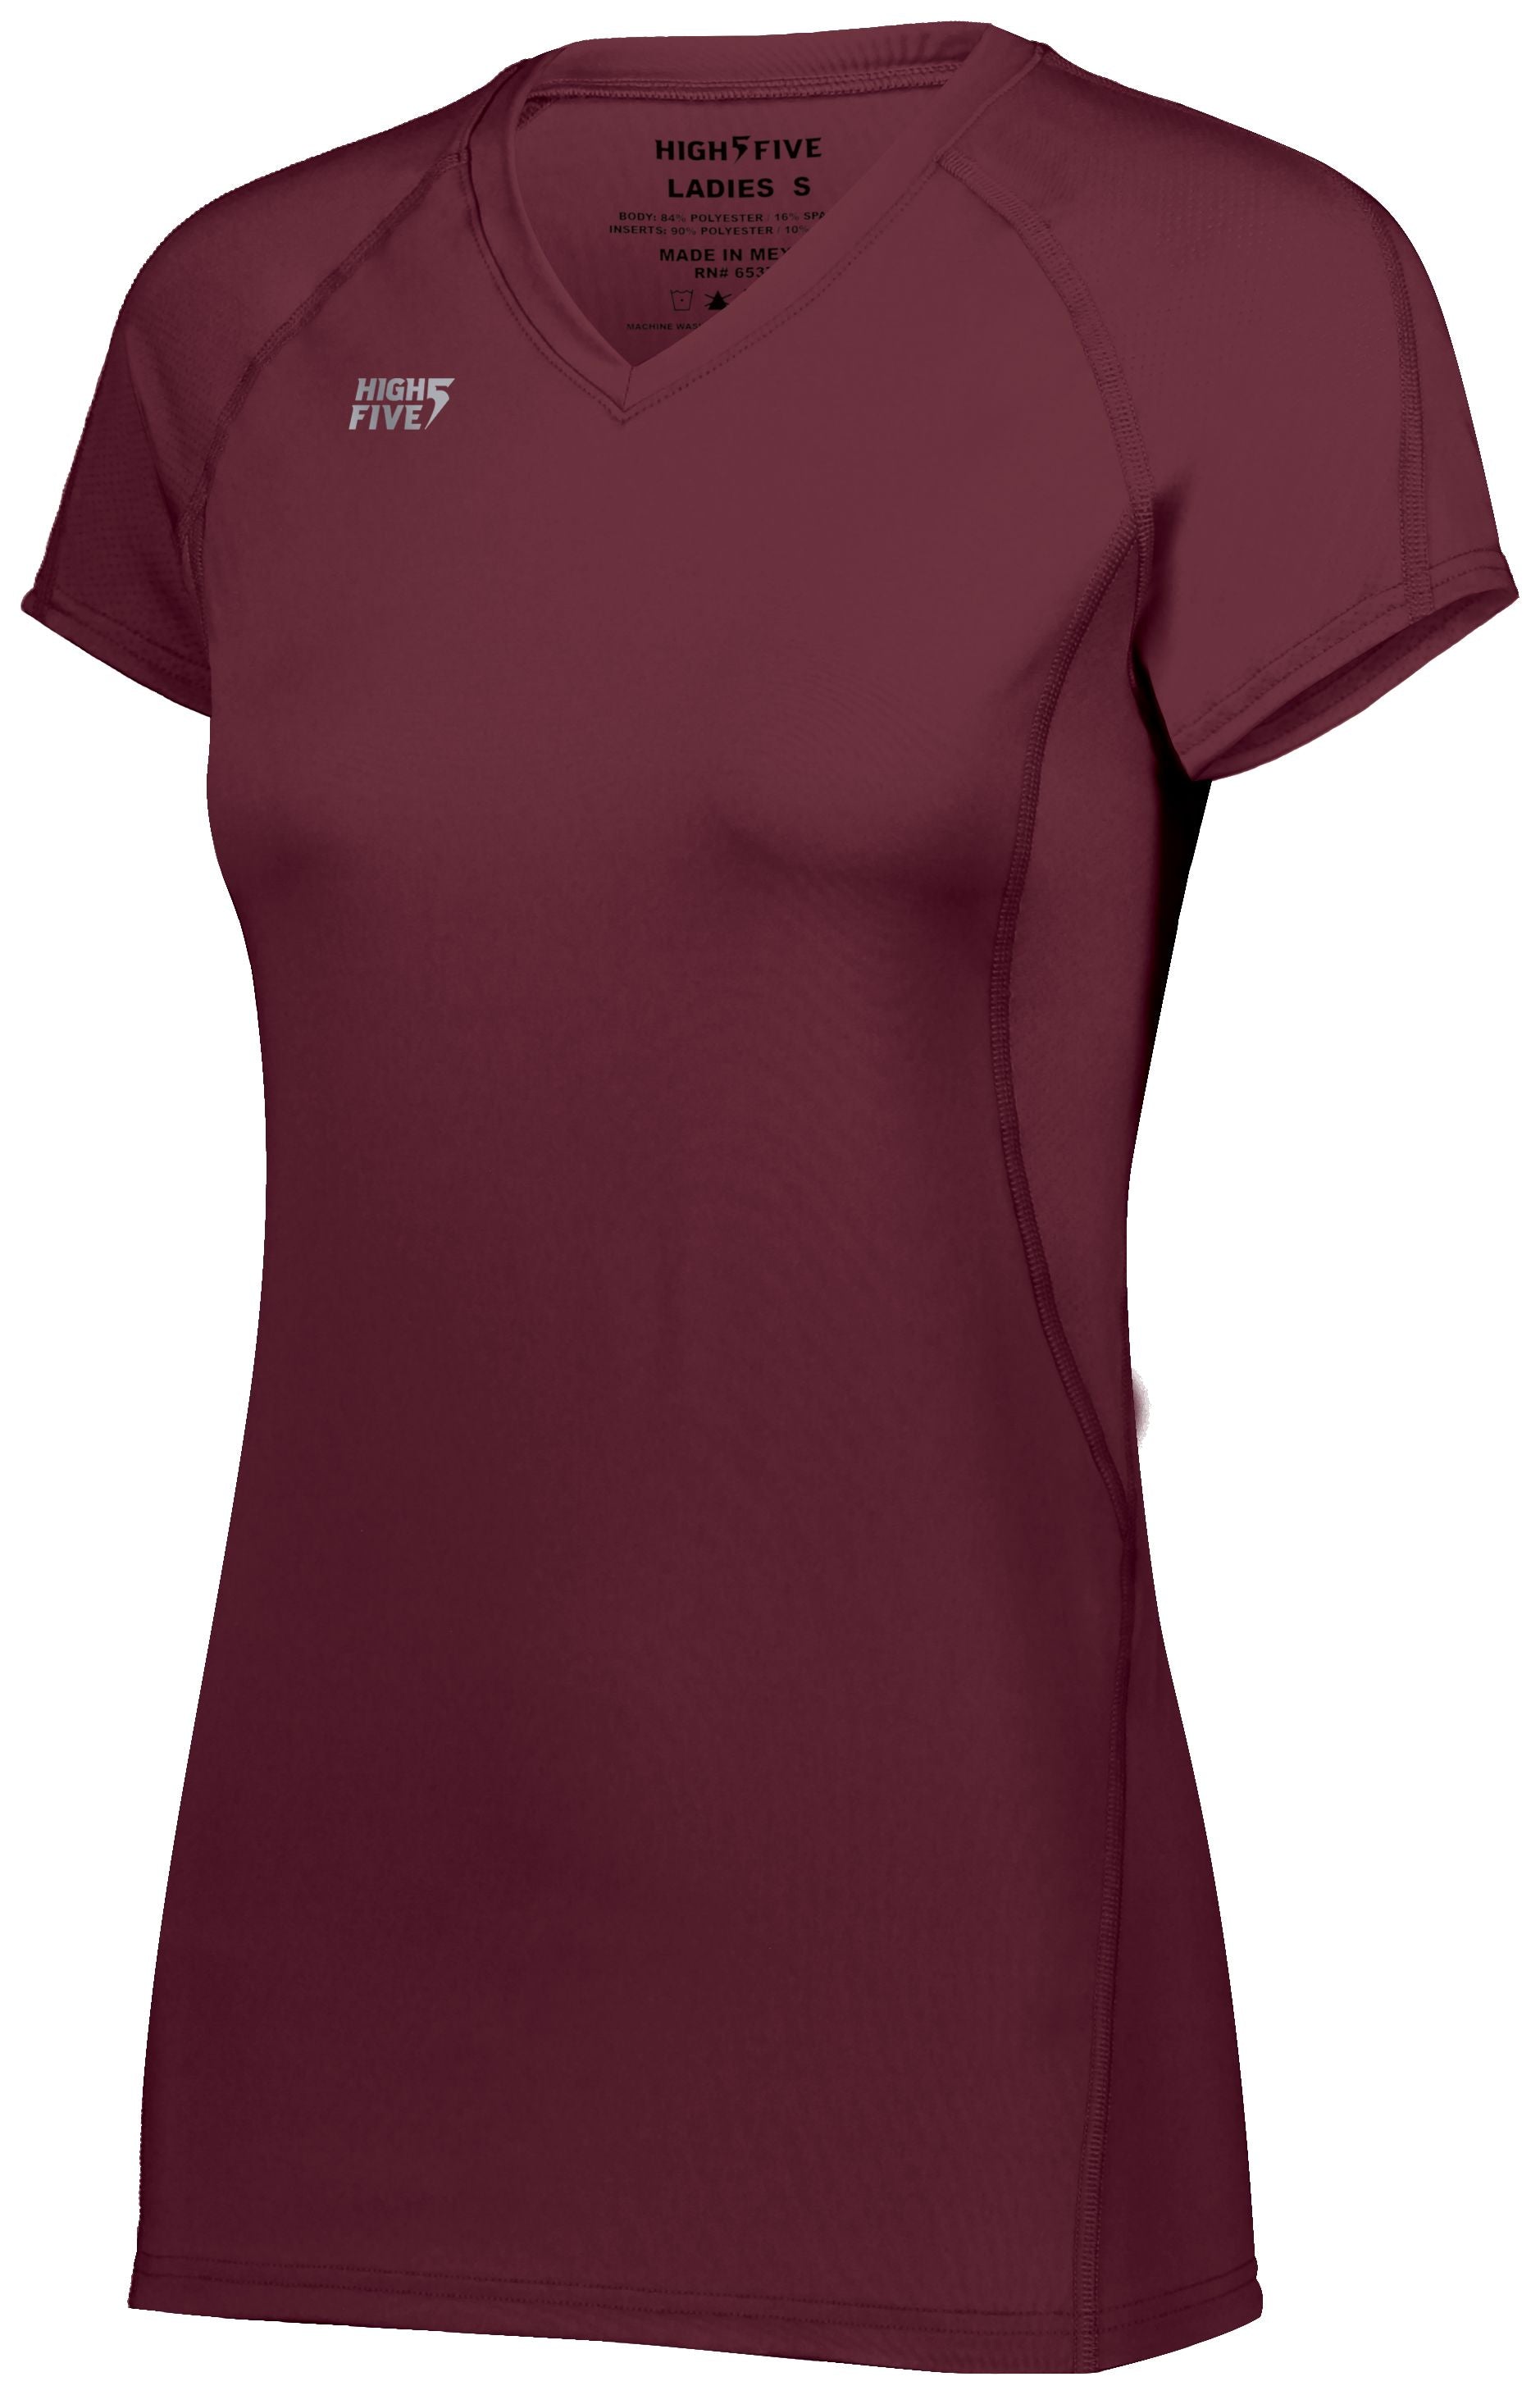 High 5 Ladies Truhit Short Sleeve Jersey in Maroon (Hlw)  -Part of the Ladies, Ladies-Jersey, High5-Products, Volleyball, Shirts product lines at KanaleyCreations.com